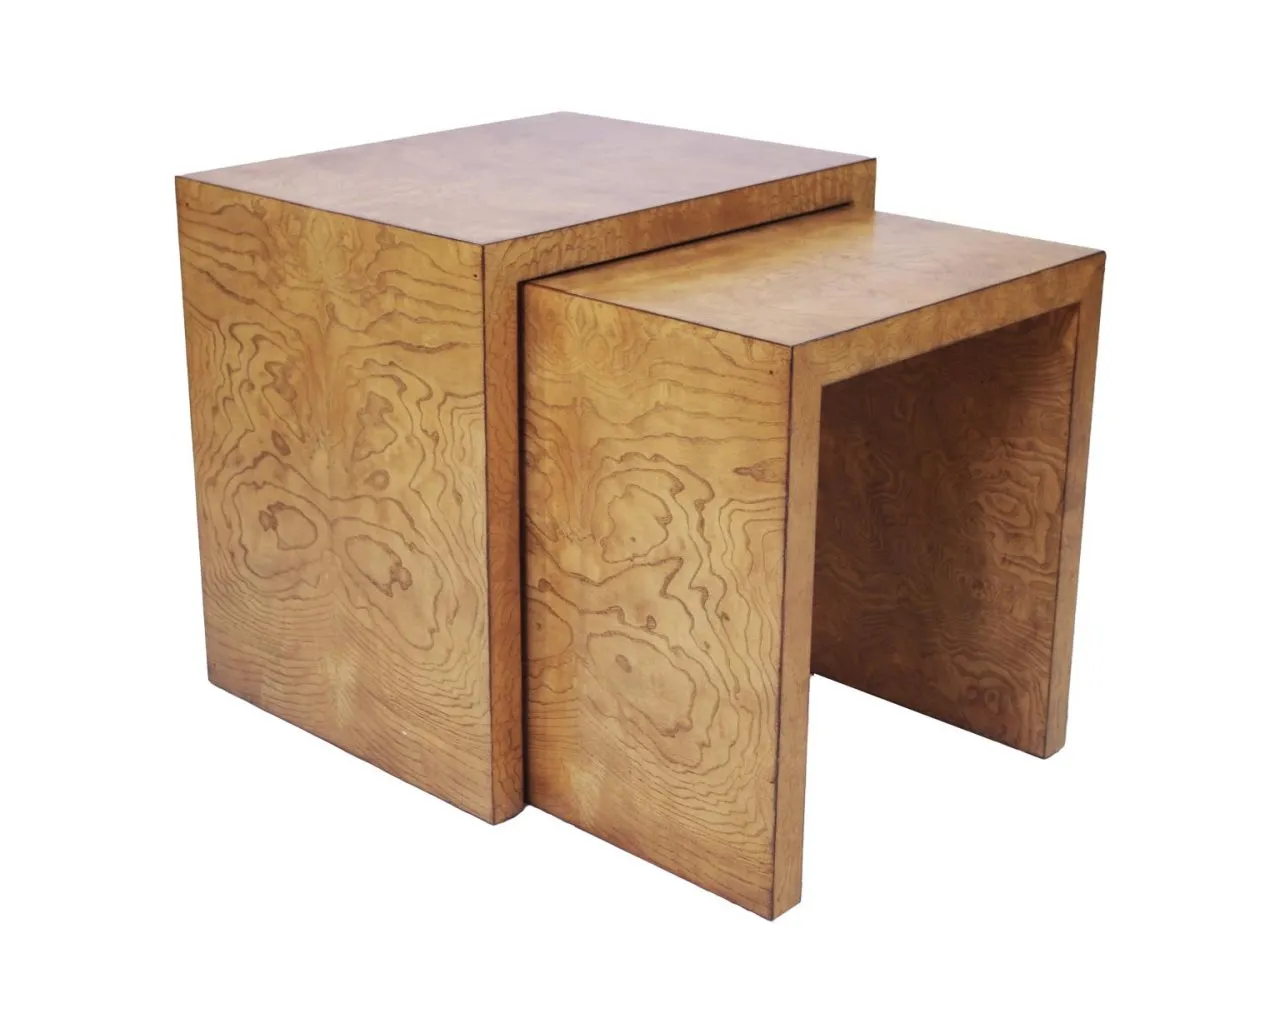 WILLIAM NESTING TABLES IN A BURLED ASH WOOD